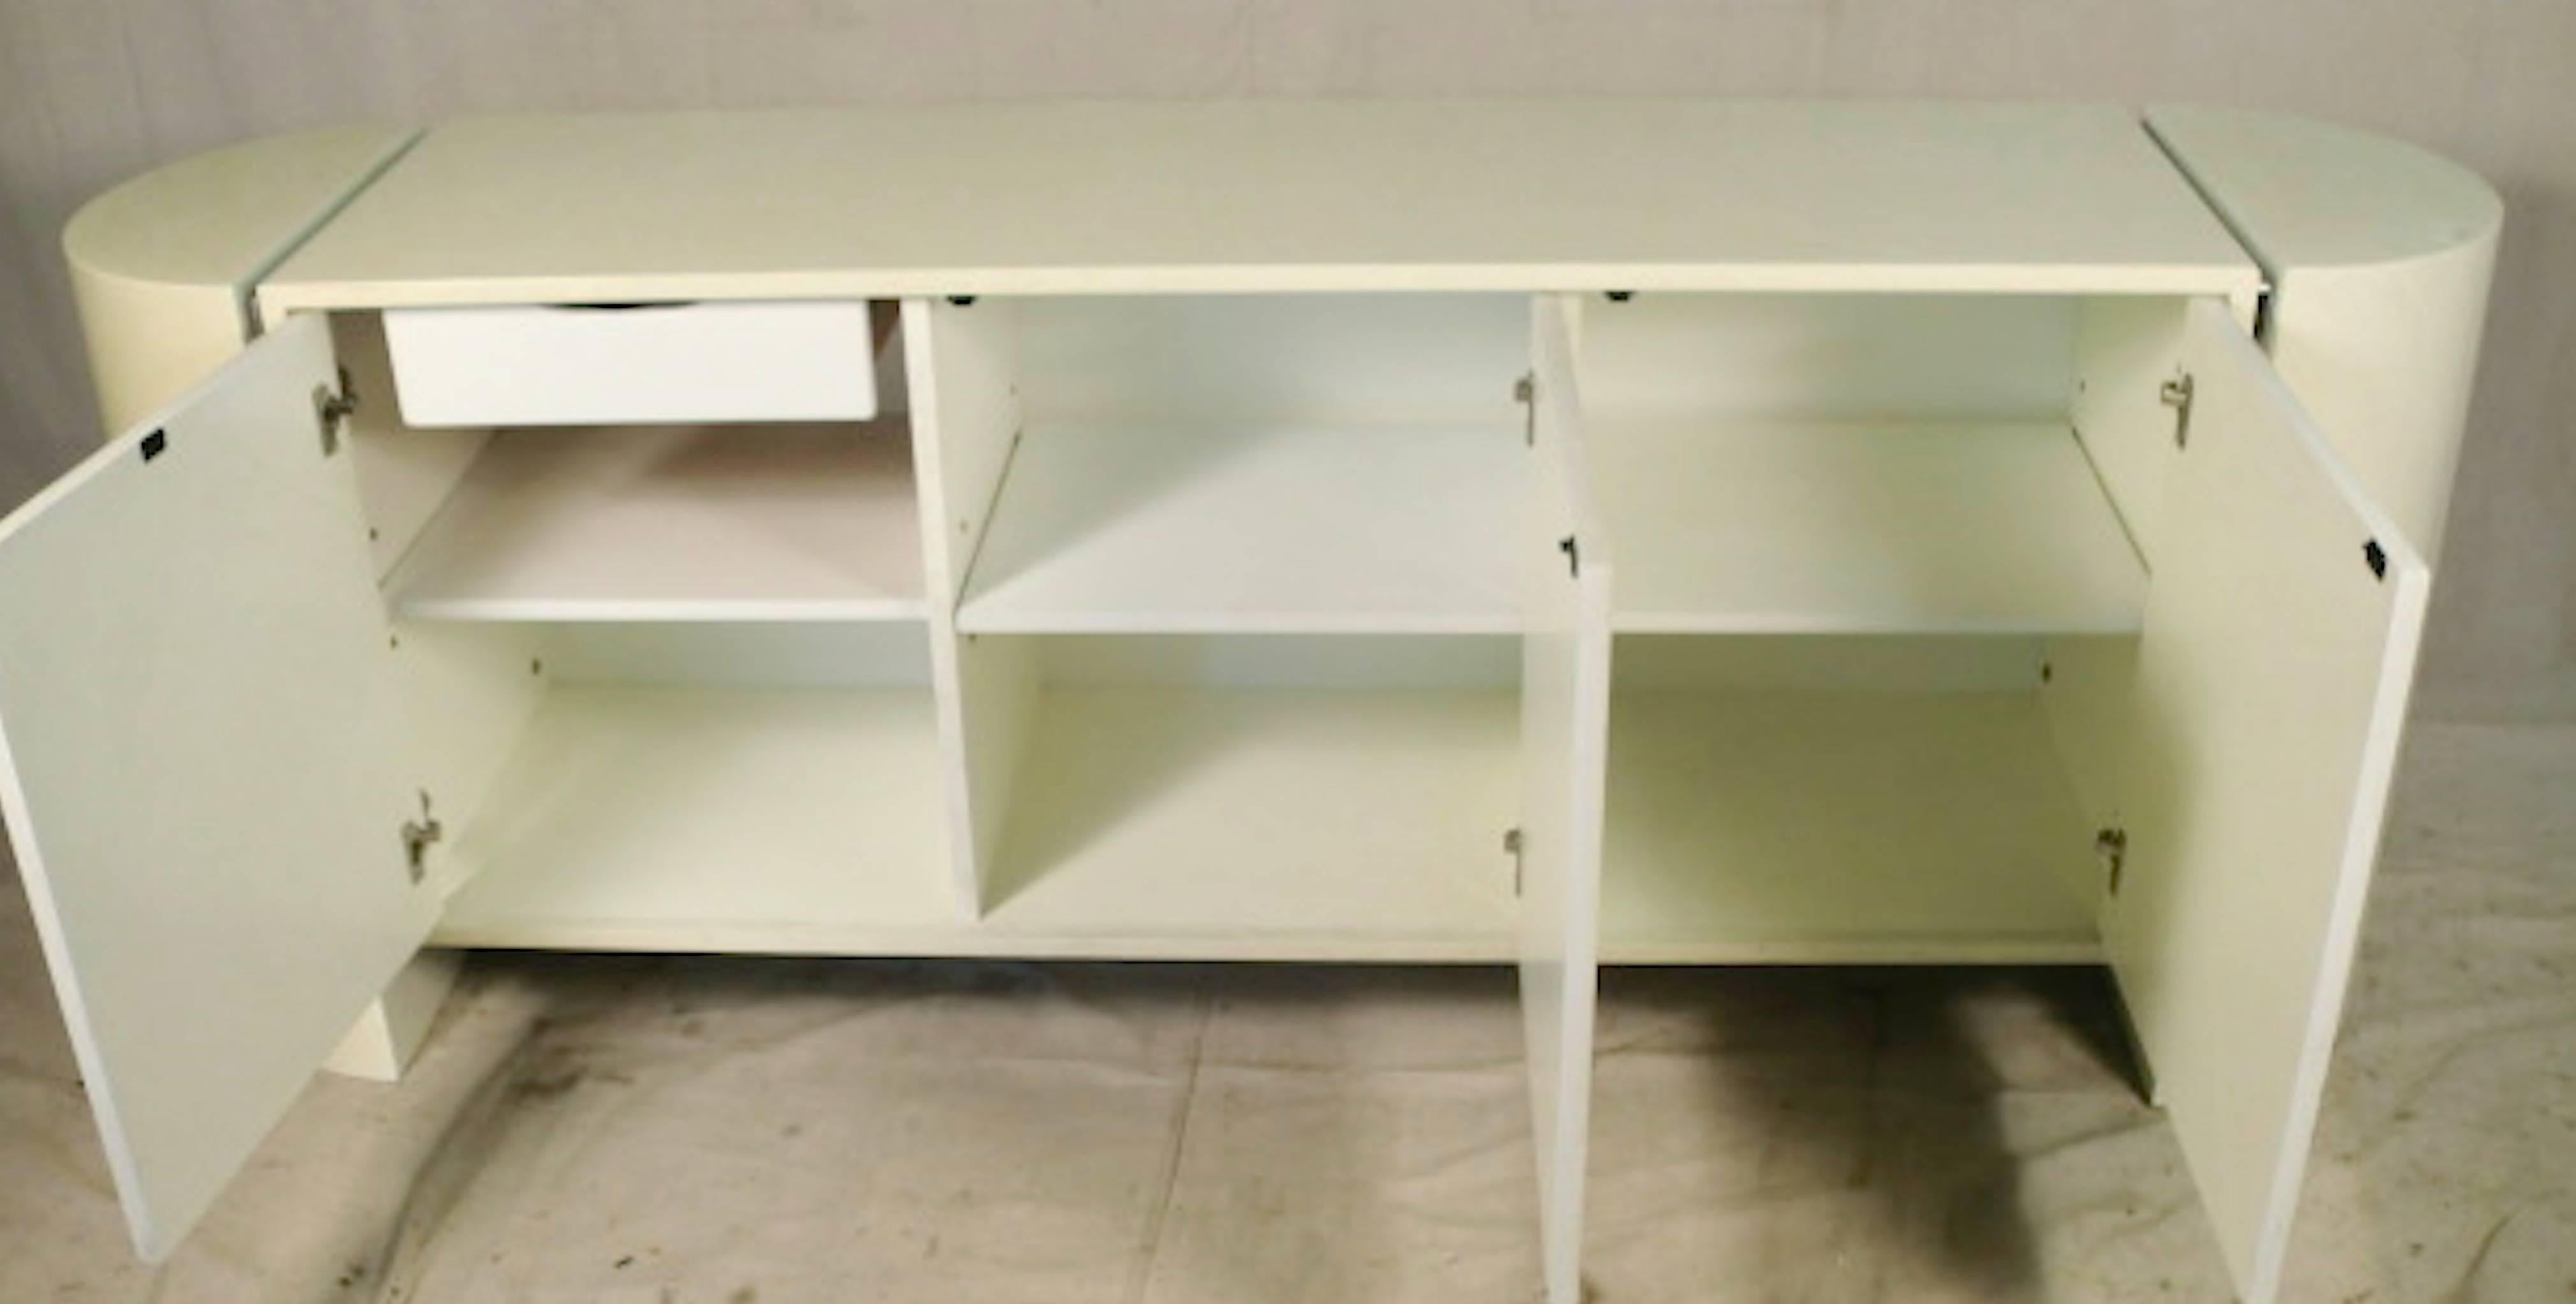 Off white cabinet with hidden storage. In the style of Karl Springer.
(Please confirm item location - NY or NJ - with dealer).
    